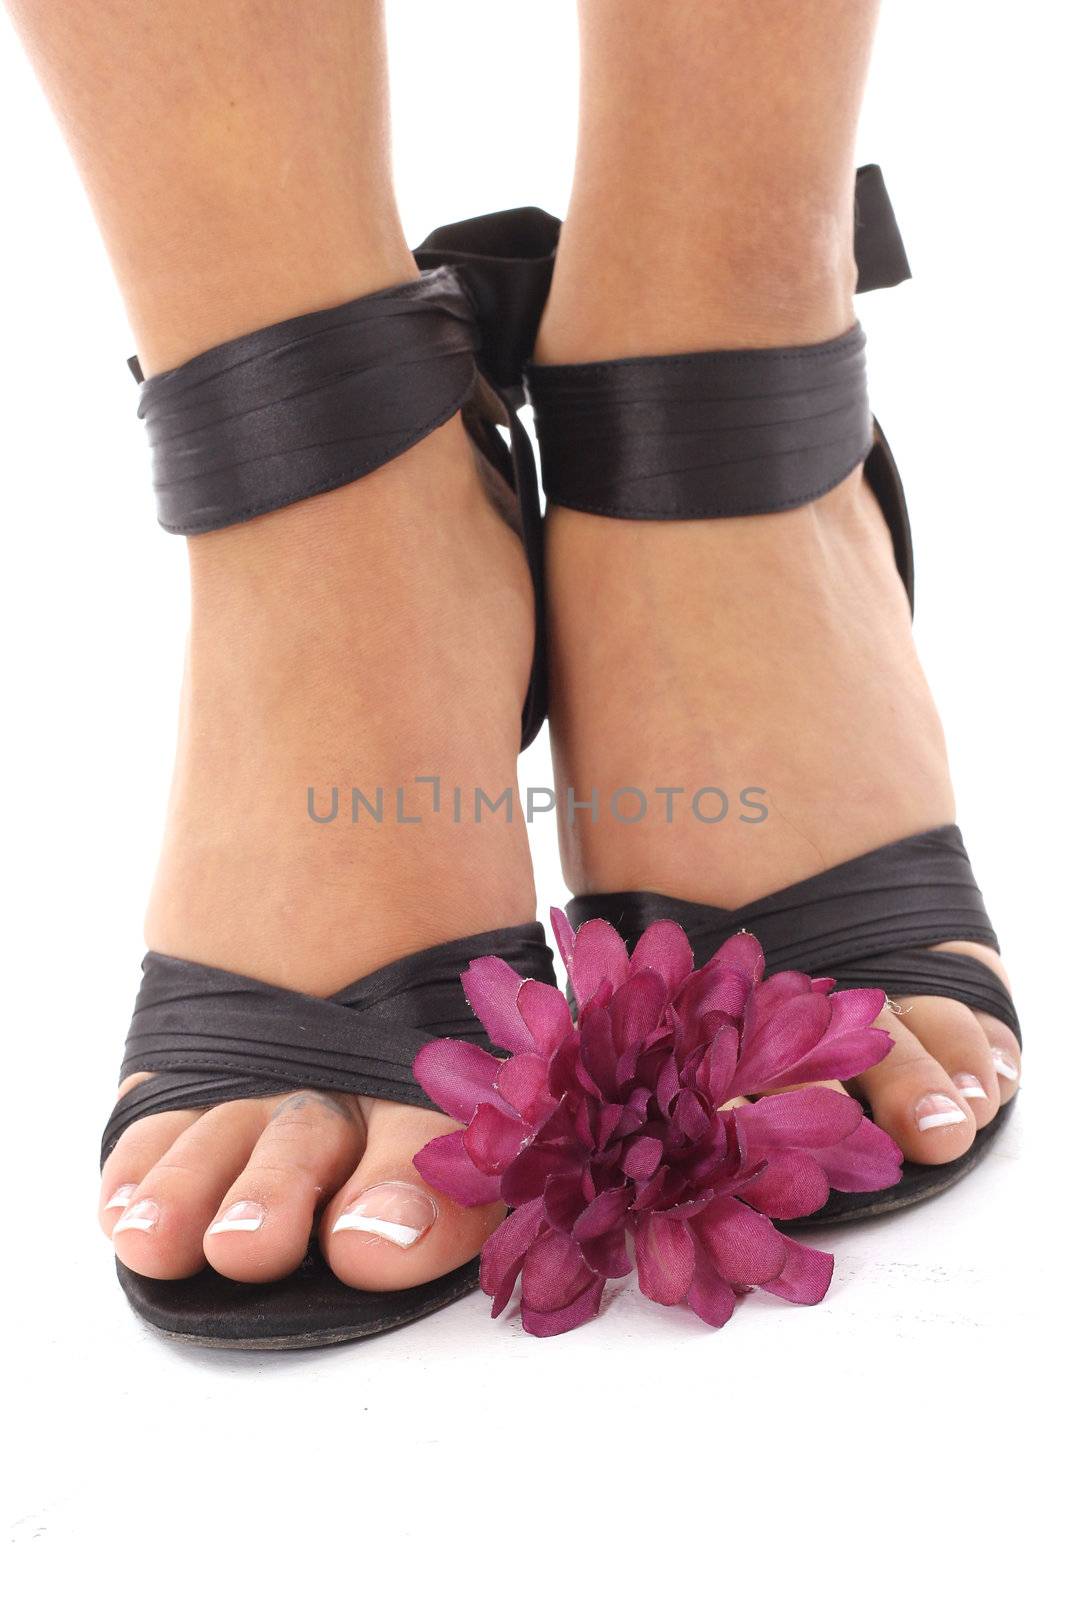 shot of beautifully manicured feet with purple flower